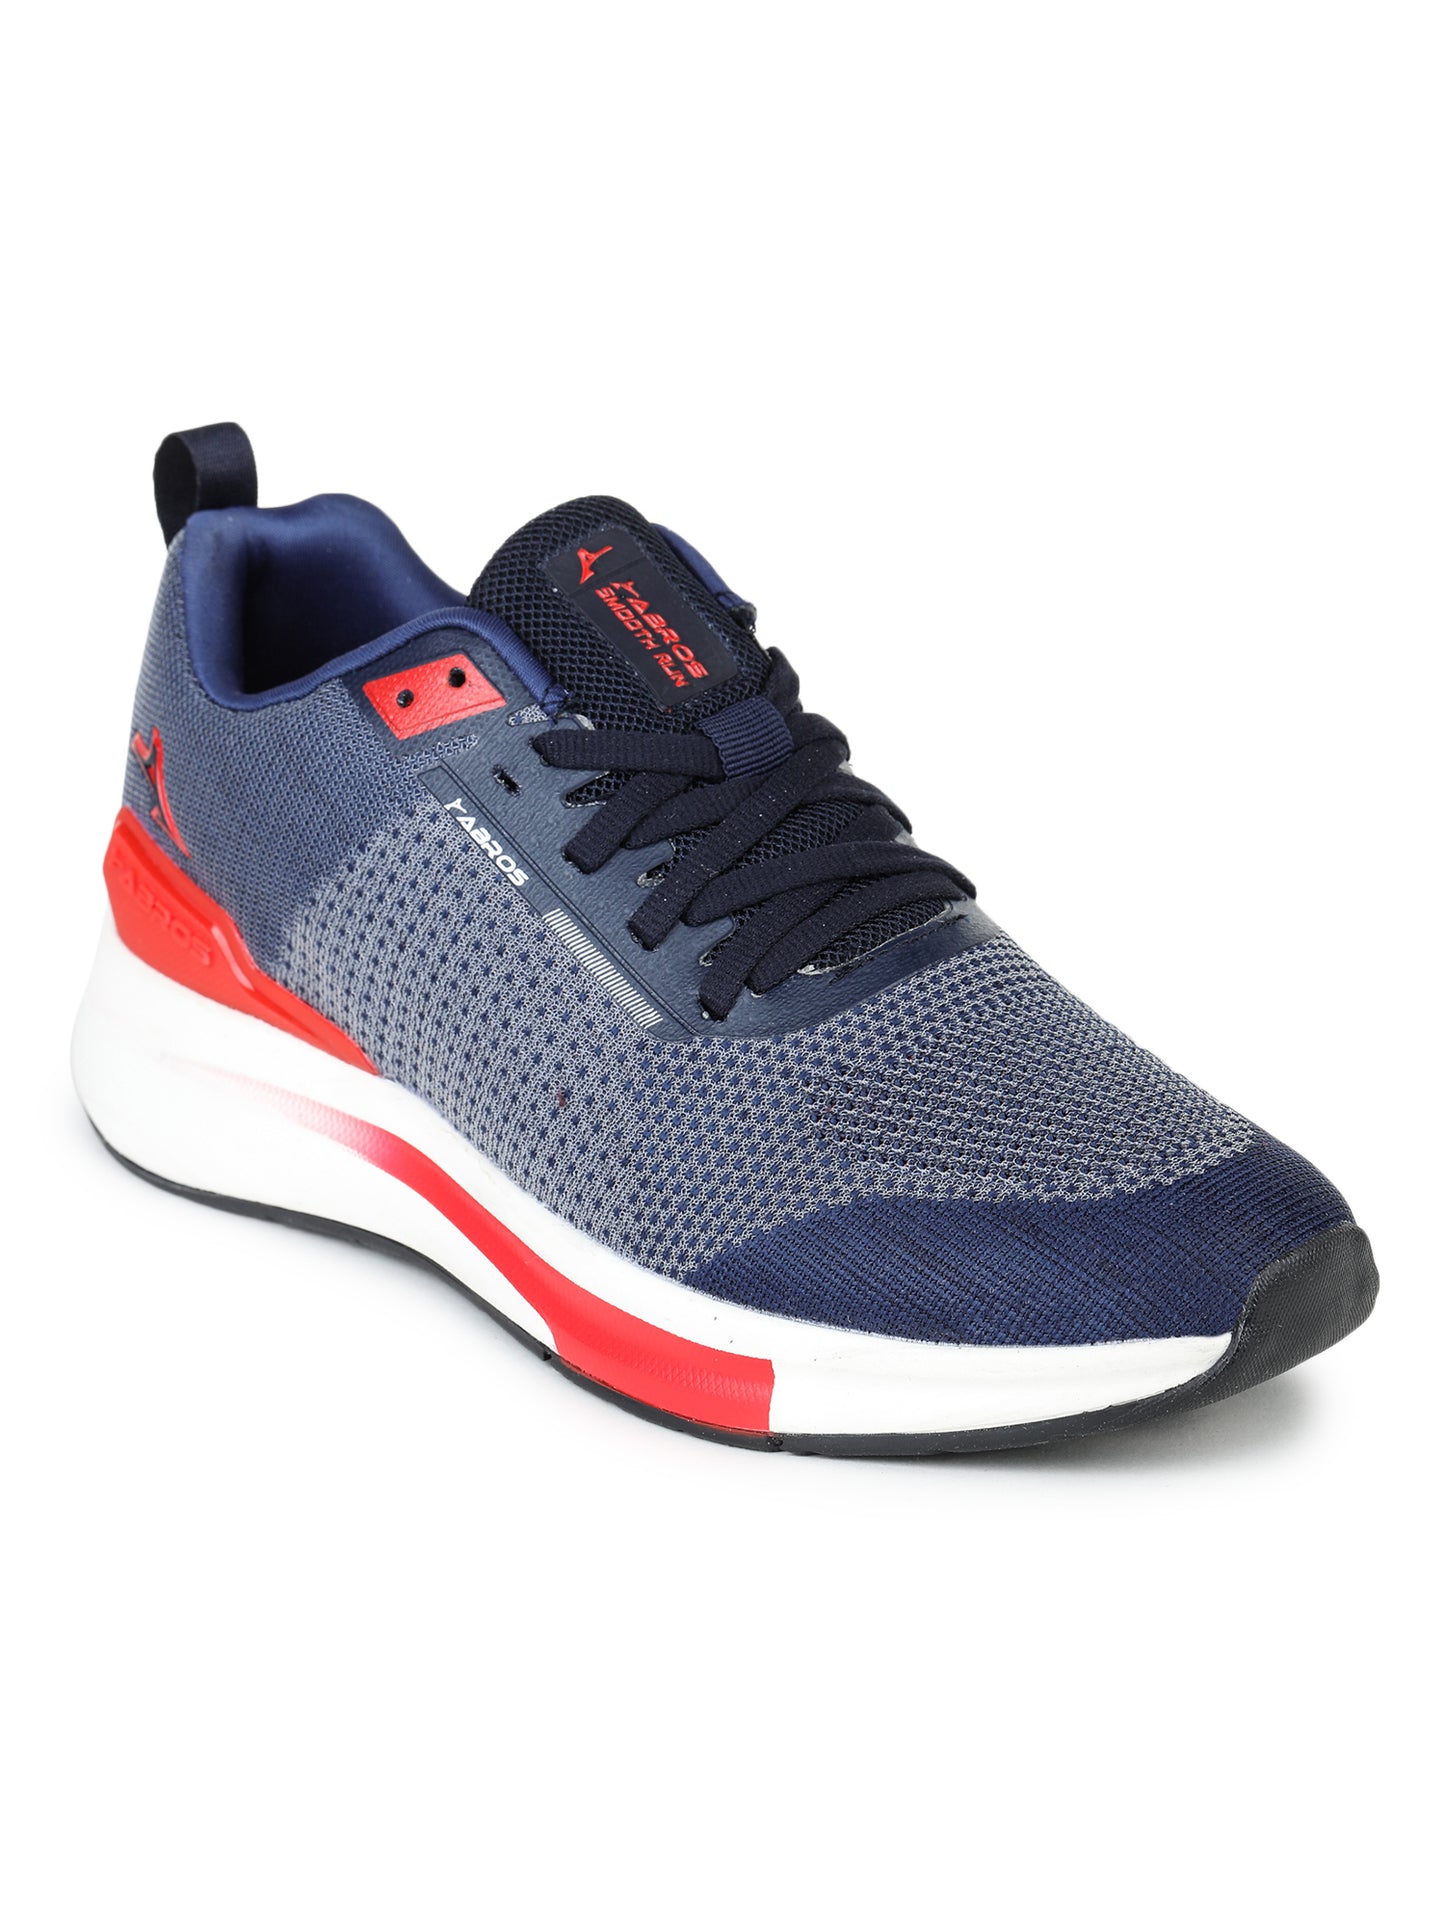 ABROS MUSTANG-PRO SPORT-SHOES For MEN'S